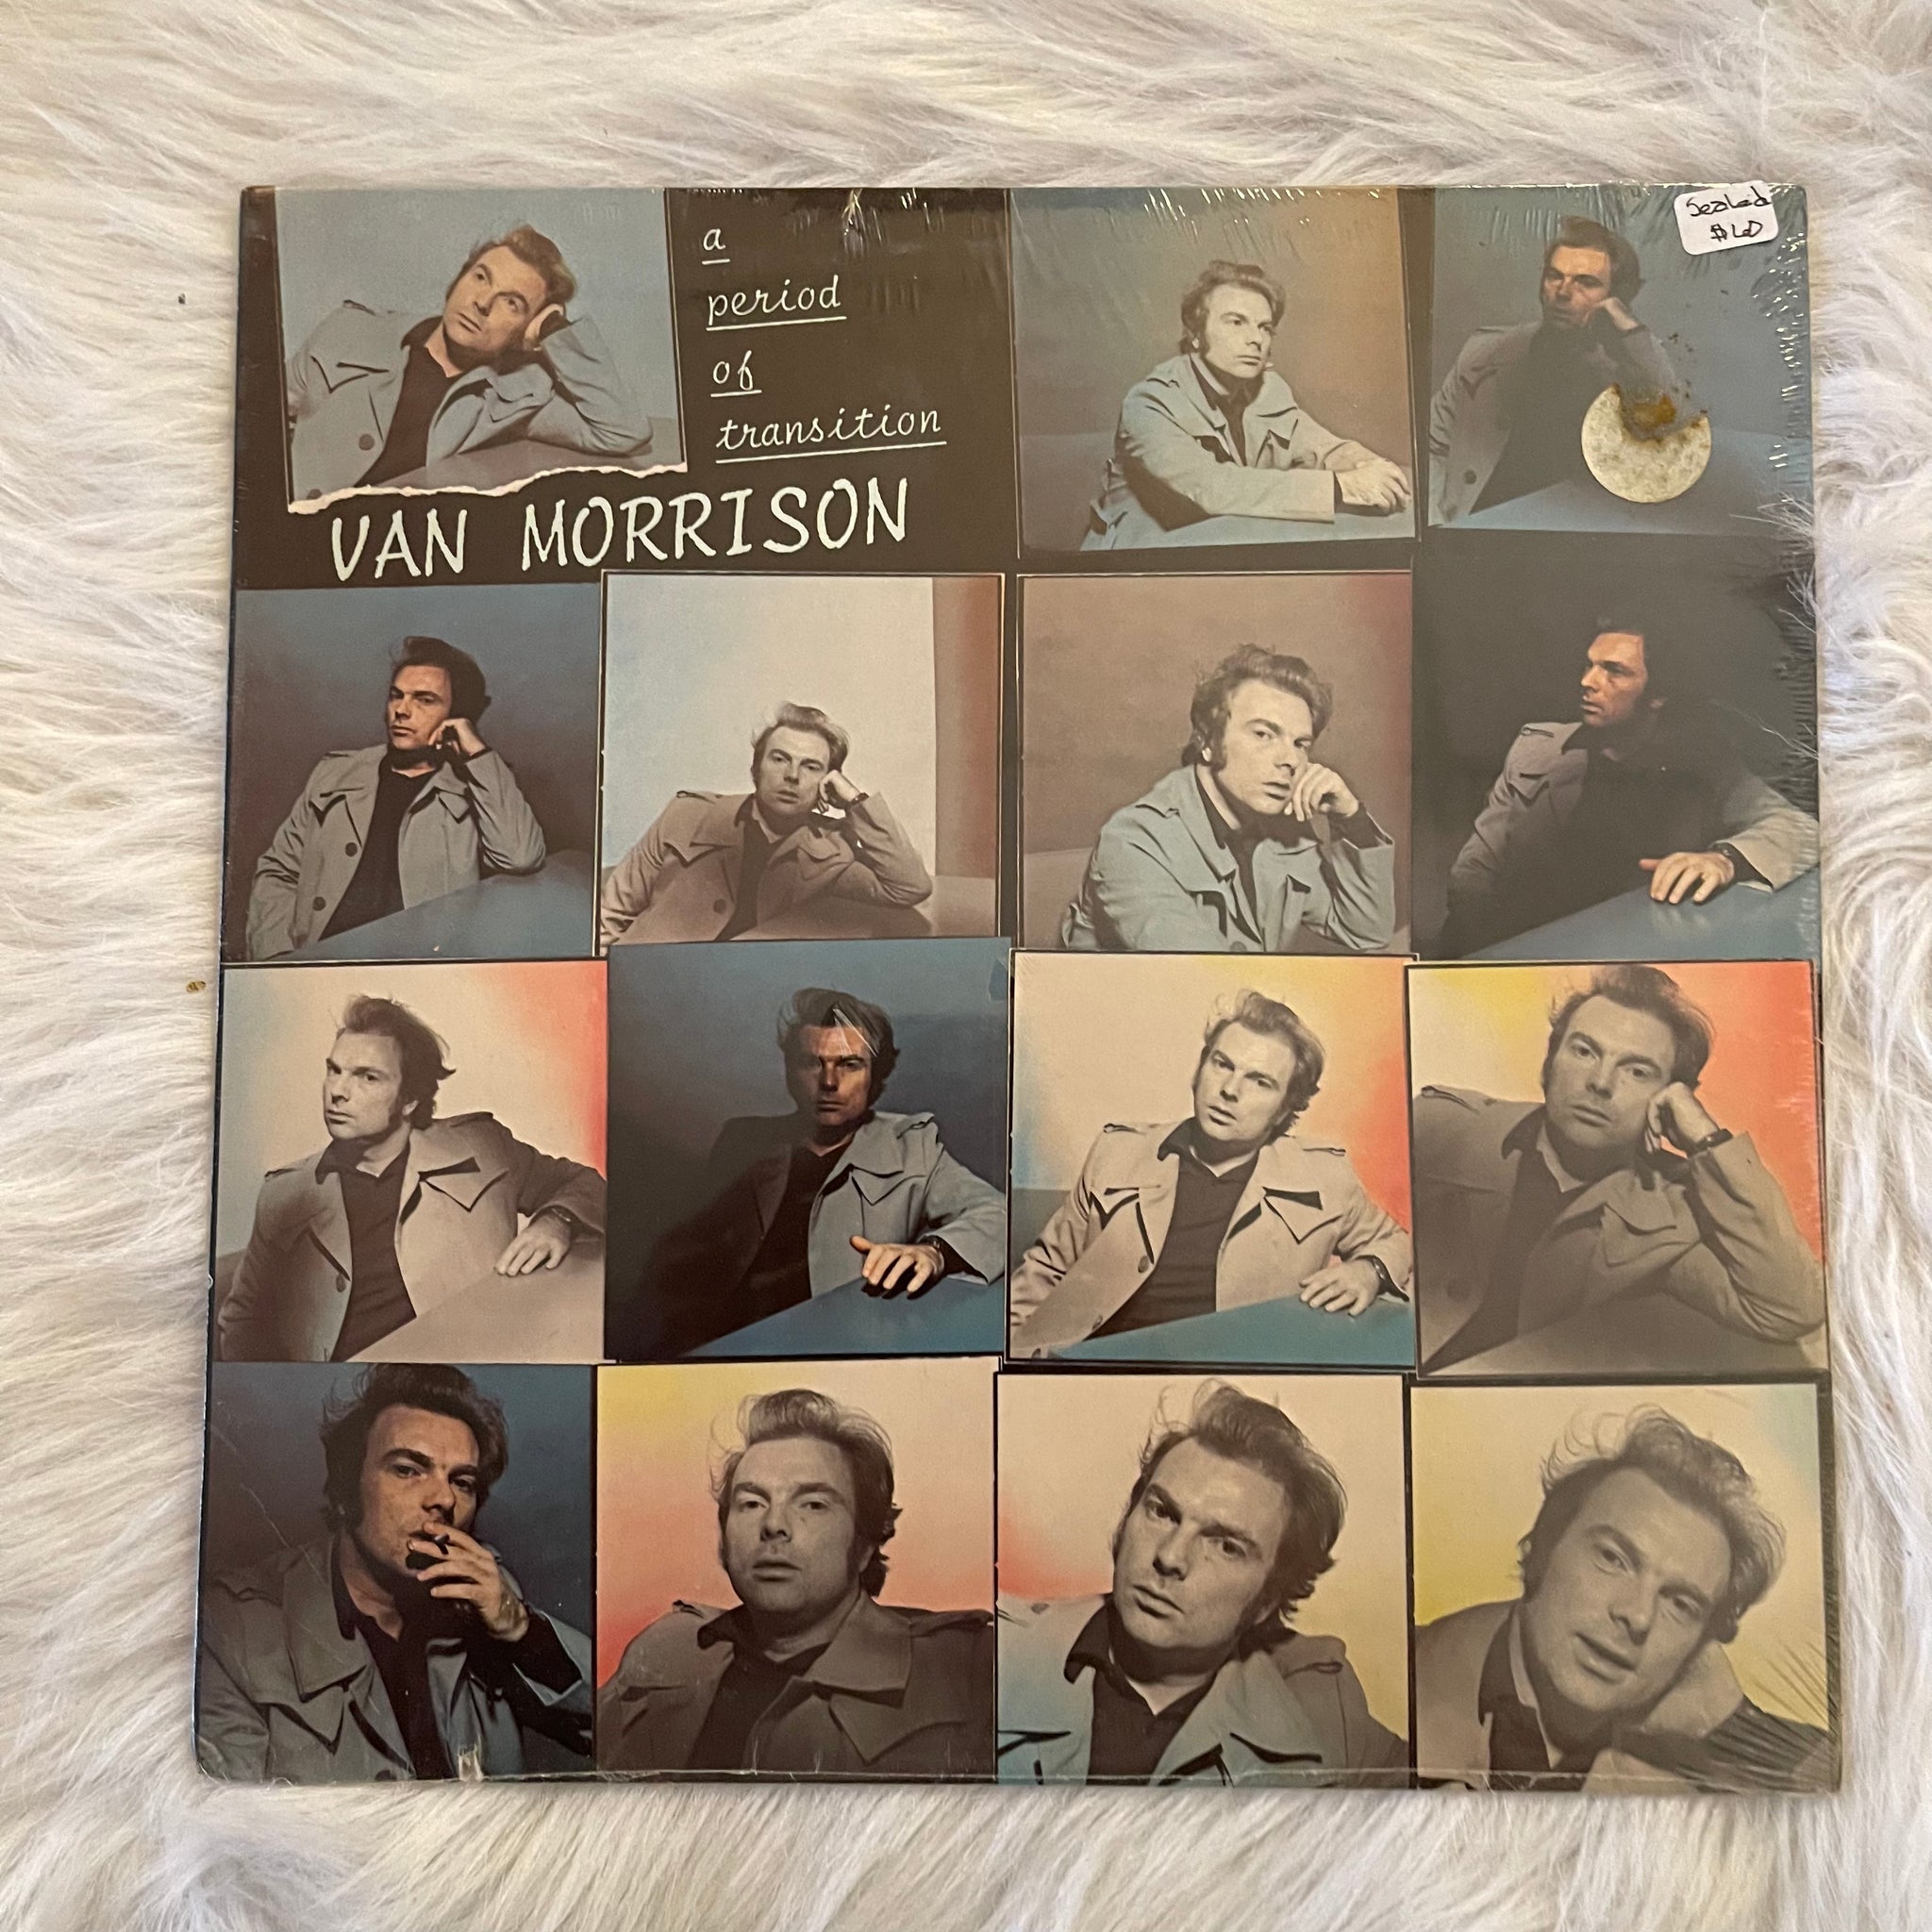 Van Morrison-A Period of Transition SEALED 1977